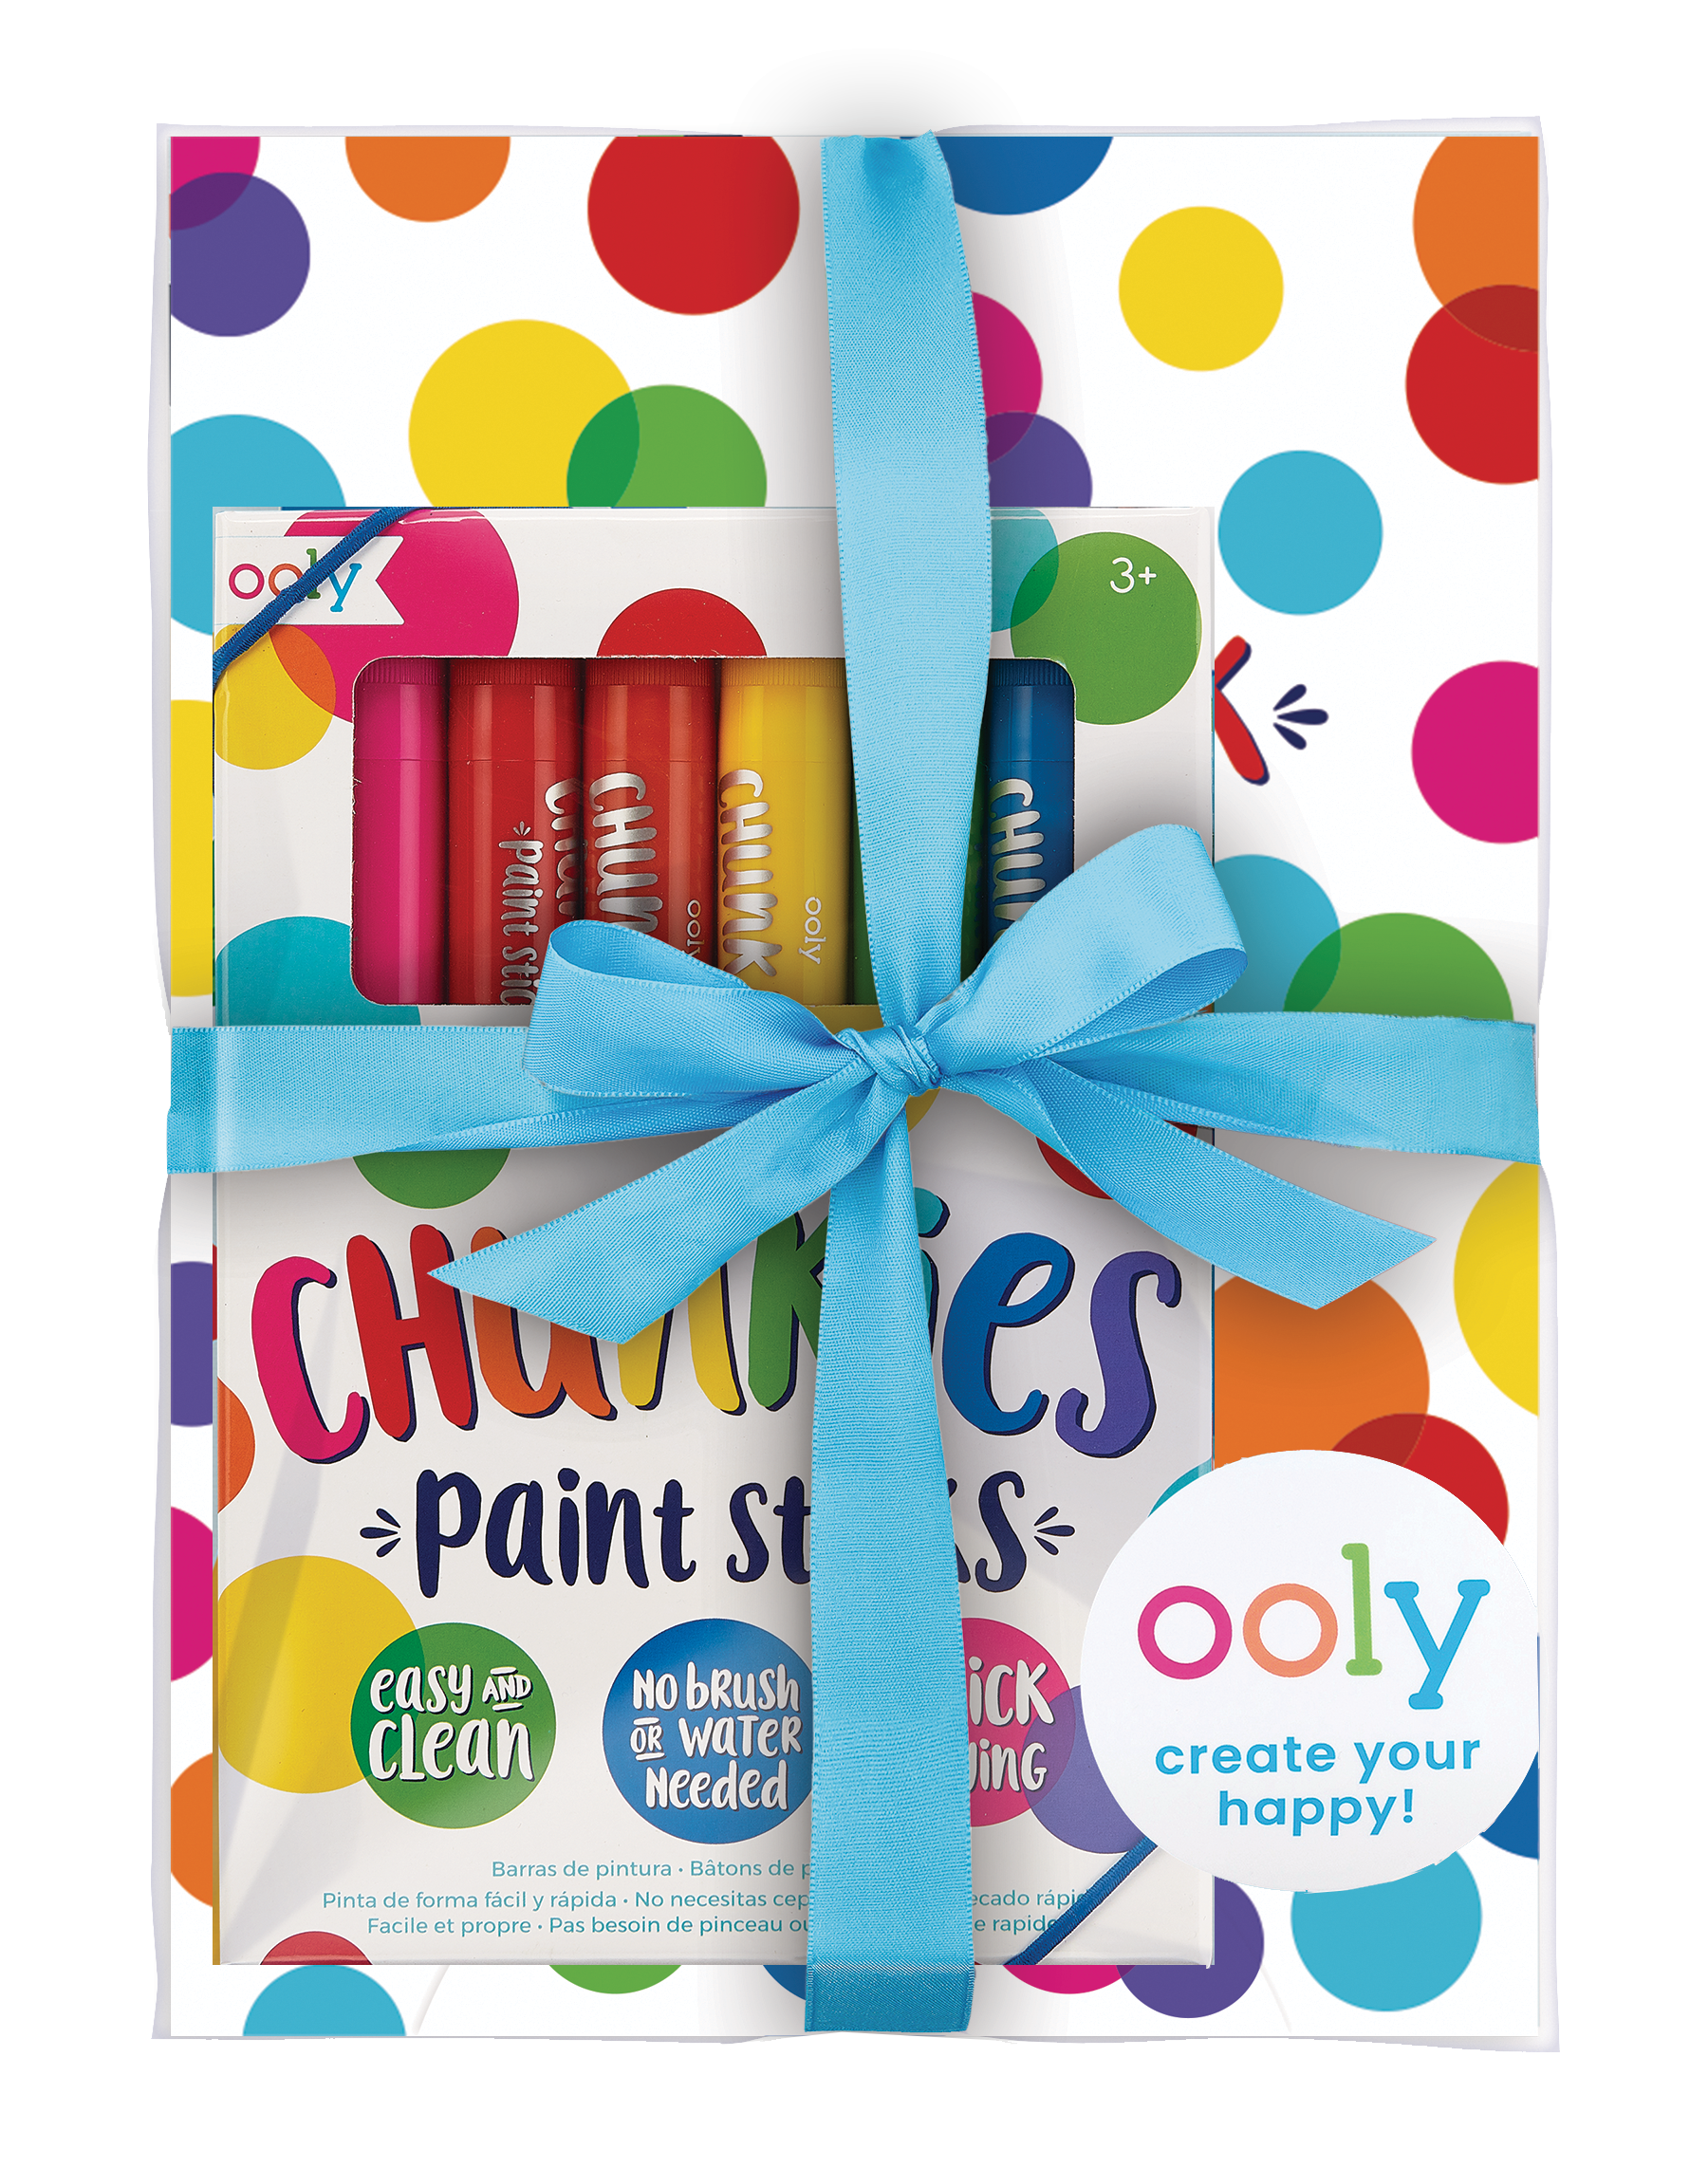 OOLY Budding Artist kids paint gift set with paint sticks and sketchbook in gift wrap